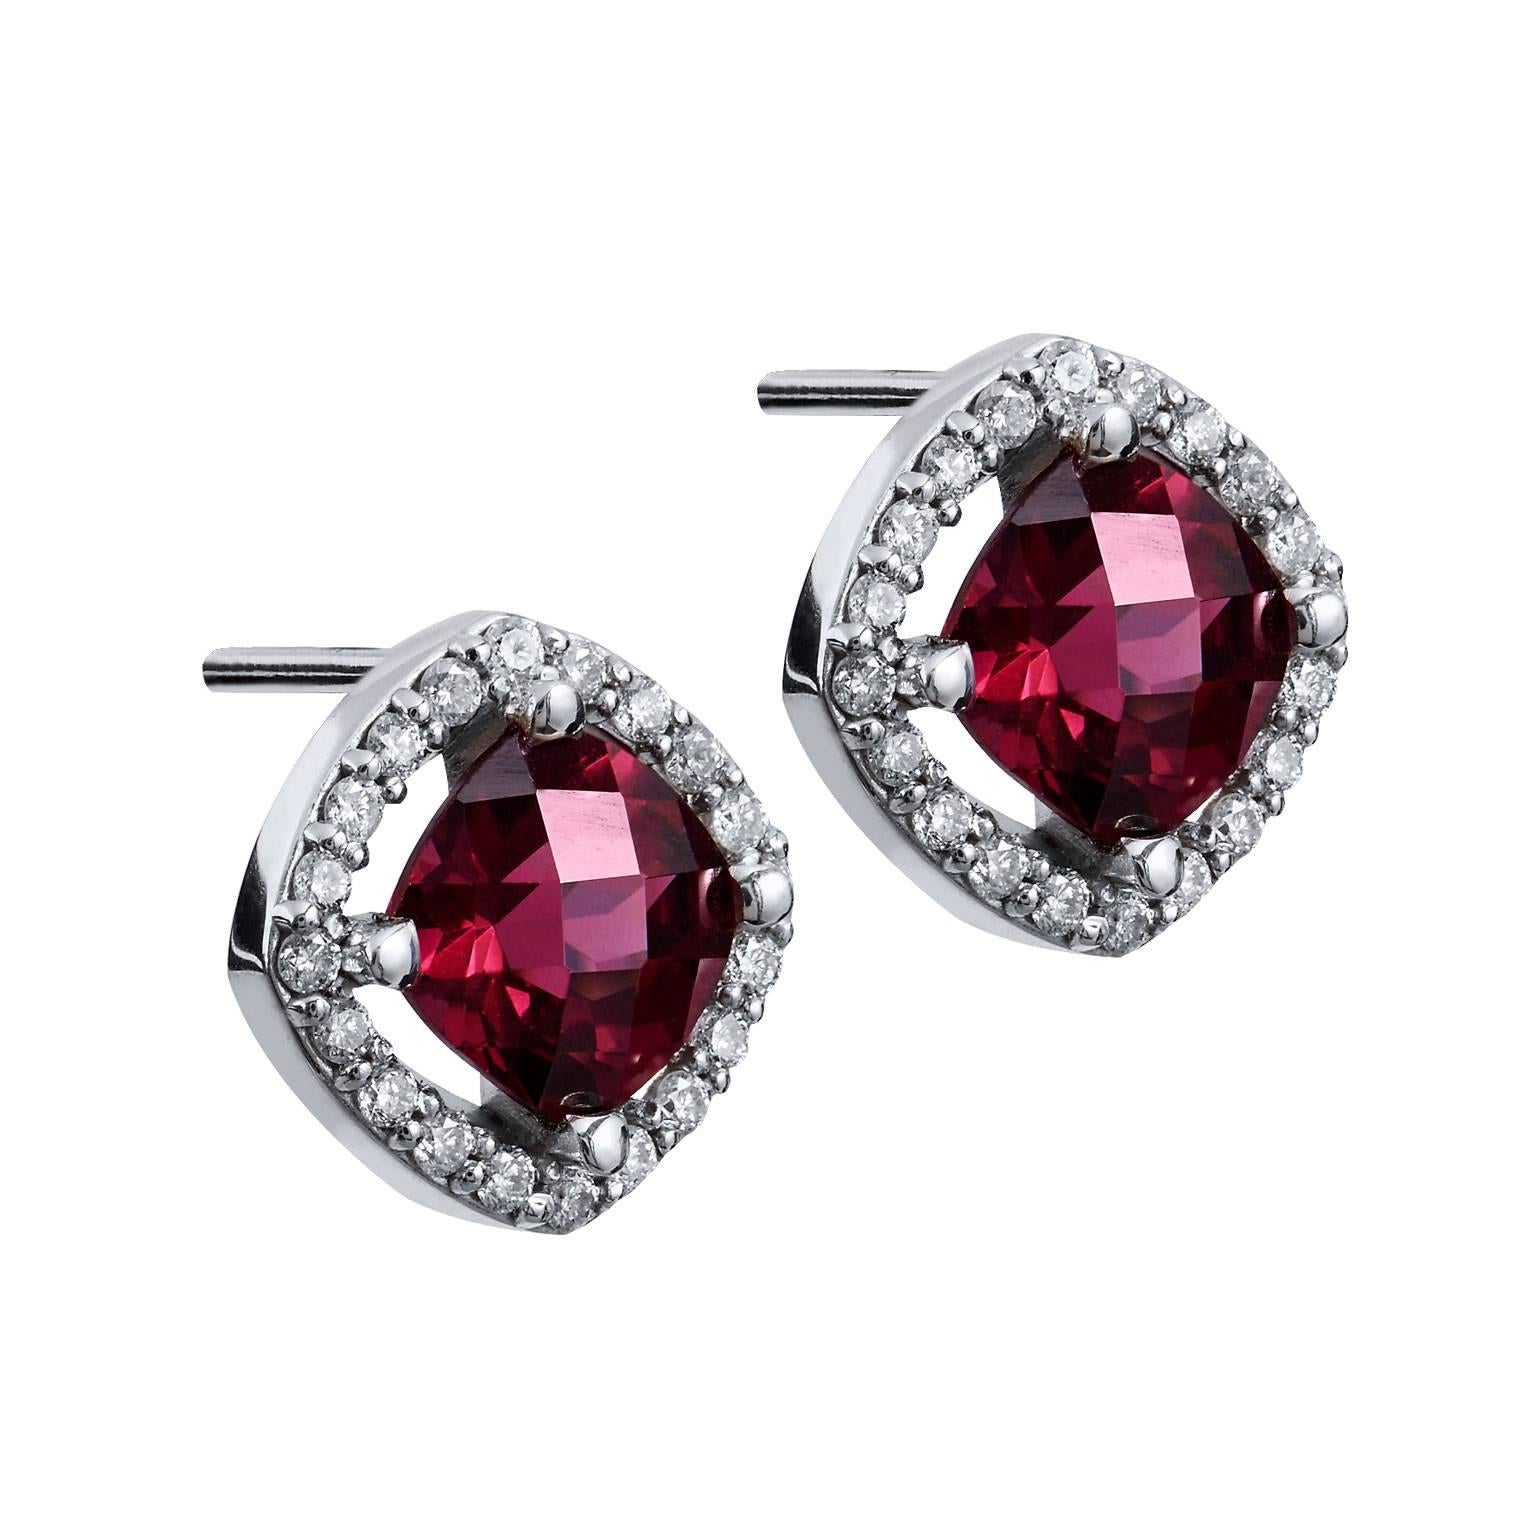 These 2.20 carat of rhodolite garnets laden in 0.28 carat of diamond are affixed in 14 karat white gold (G/HI1). These handmade stud earrings shimmer with subtle voluminosity.